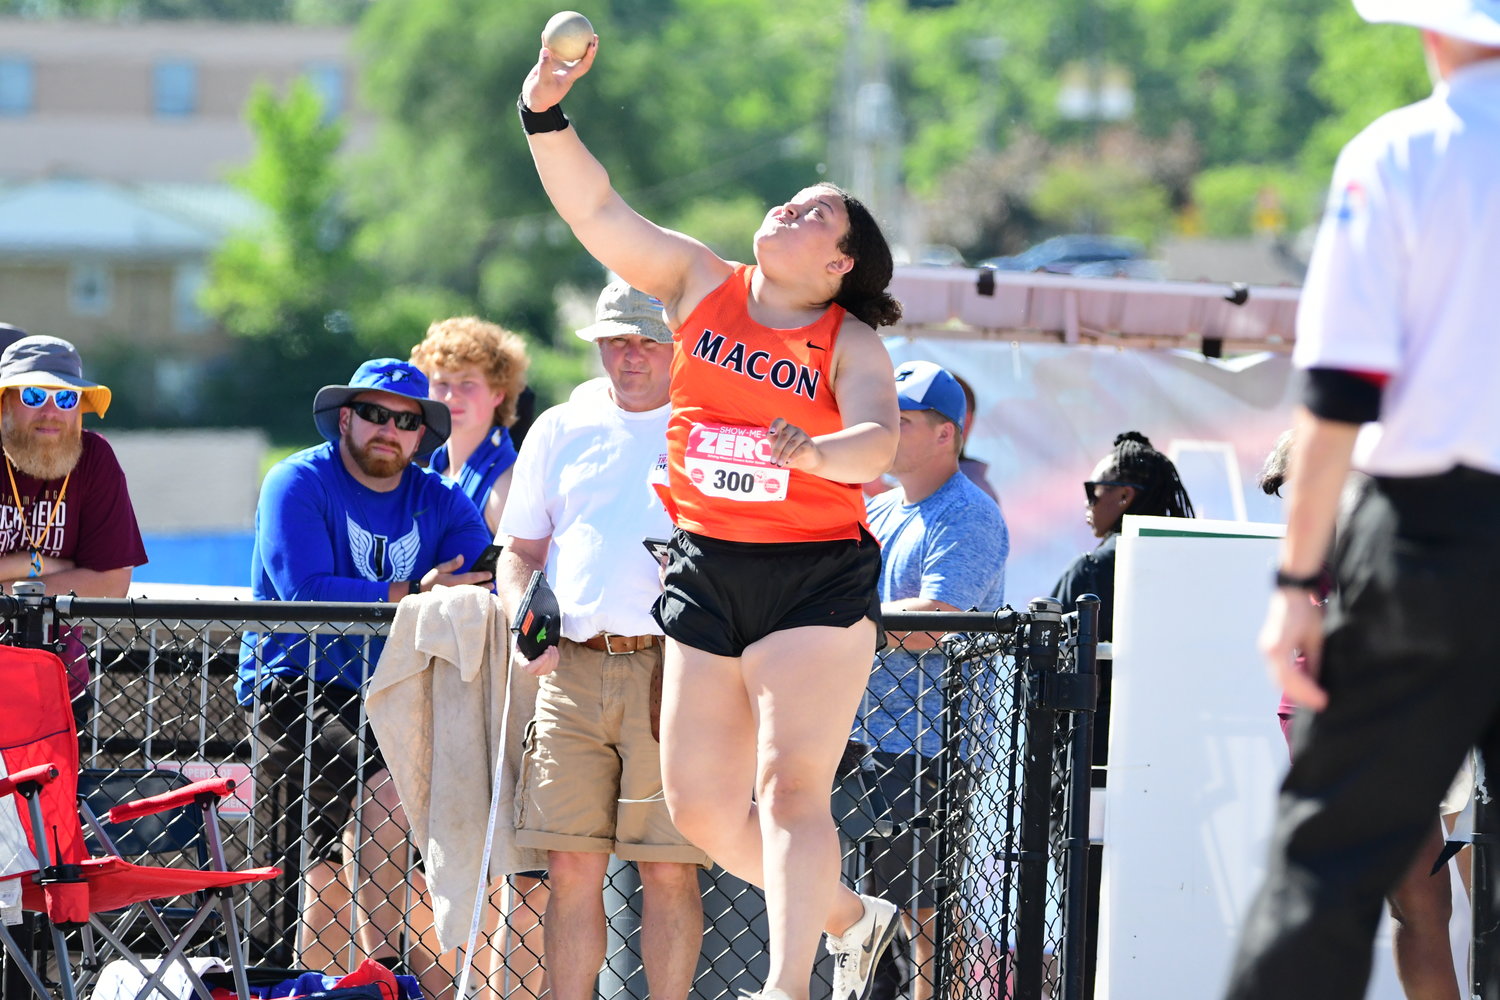 Macon's Chezney Smith competes in the Class 3 girls shot put at the 2022 MSHSAA State Track and Field Championships.